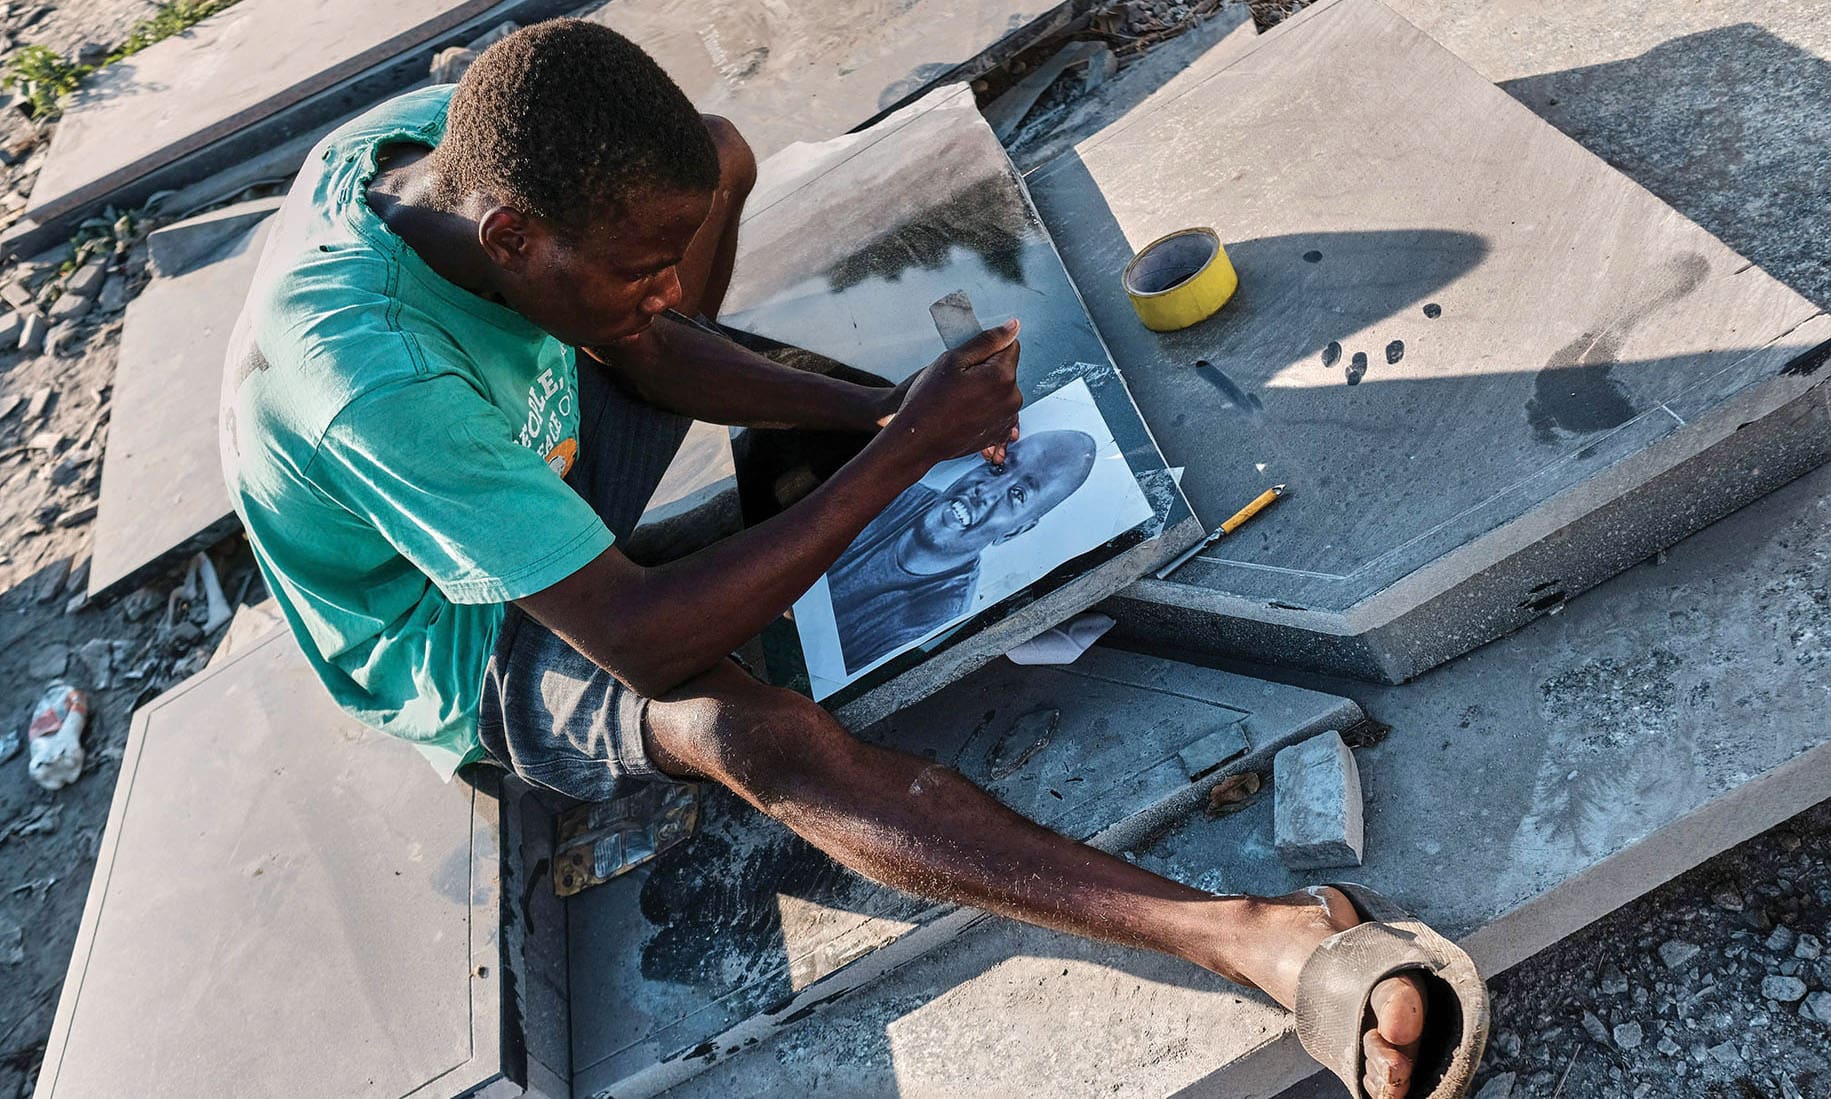 Denzel Karombe a 19-year-old school leaver who engraves portrait artworks onto polished black granite tombstones for Nyumba Yanga a tombstone-making business uses a drill bit and tapping stone to etch a potrait at his workstation in Rugare township Harare, Zimbabwe.—AFP photos